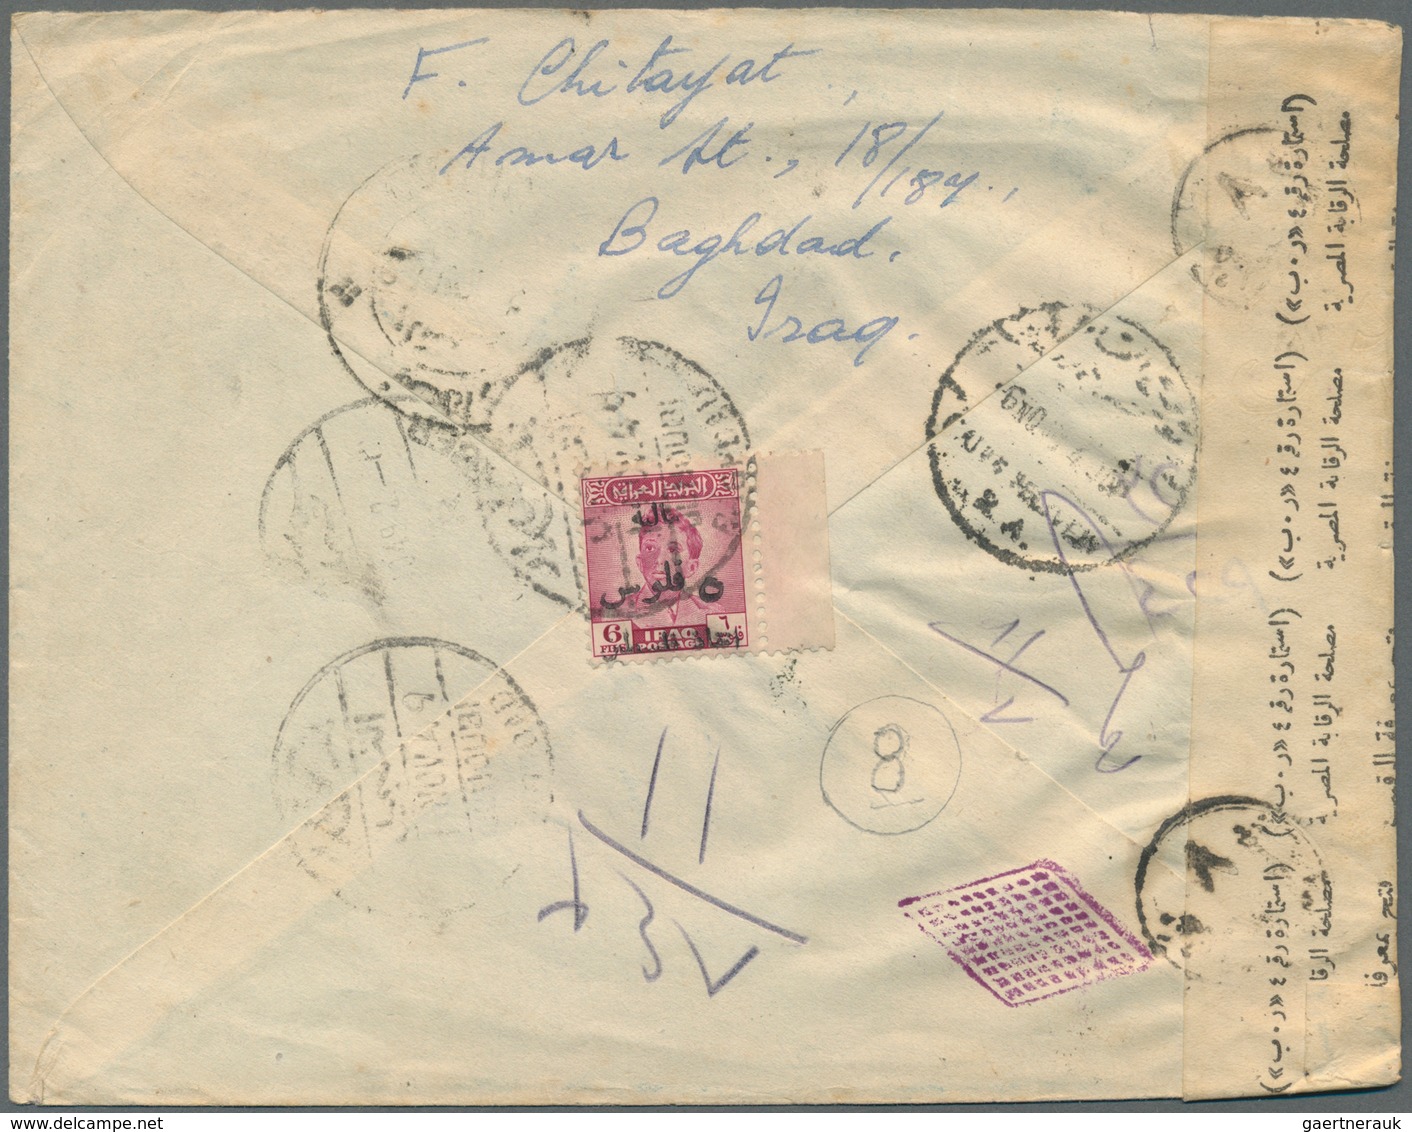 Irak: 1949, 20 F., 40 F. And 50 F. UPU Tied "DOUBI BAGDHAD 1 NOV 49"to Censored Air Mail Cover To Al - Irak